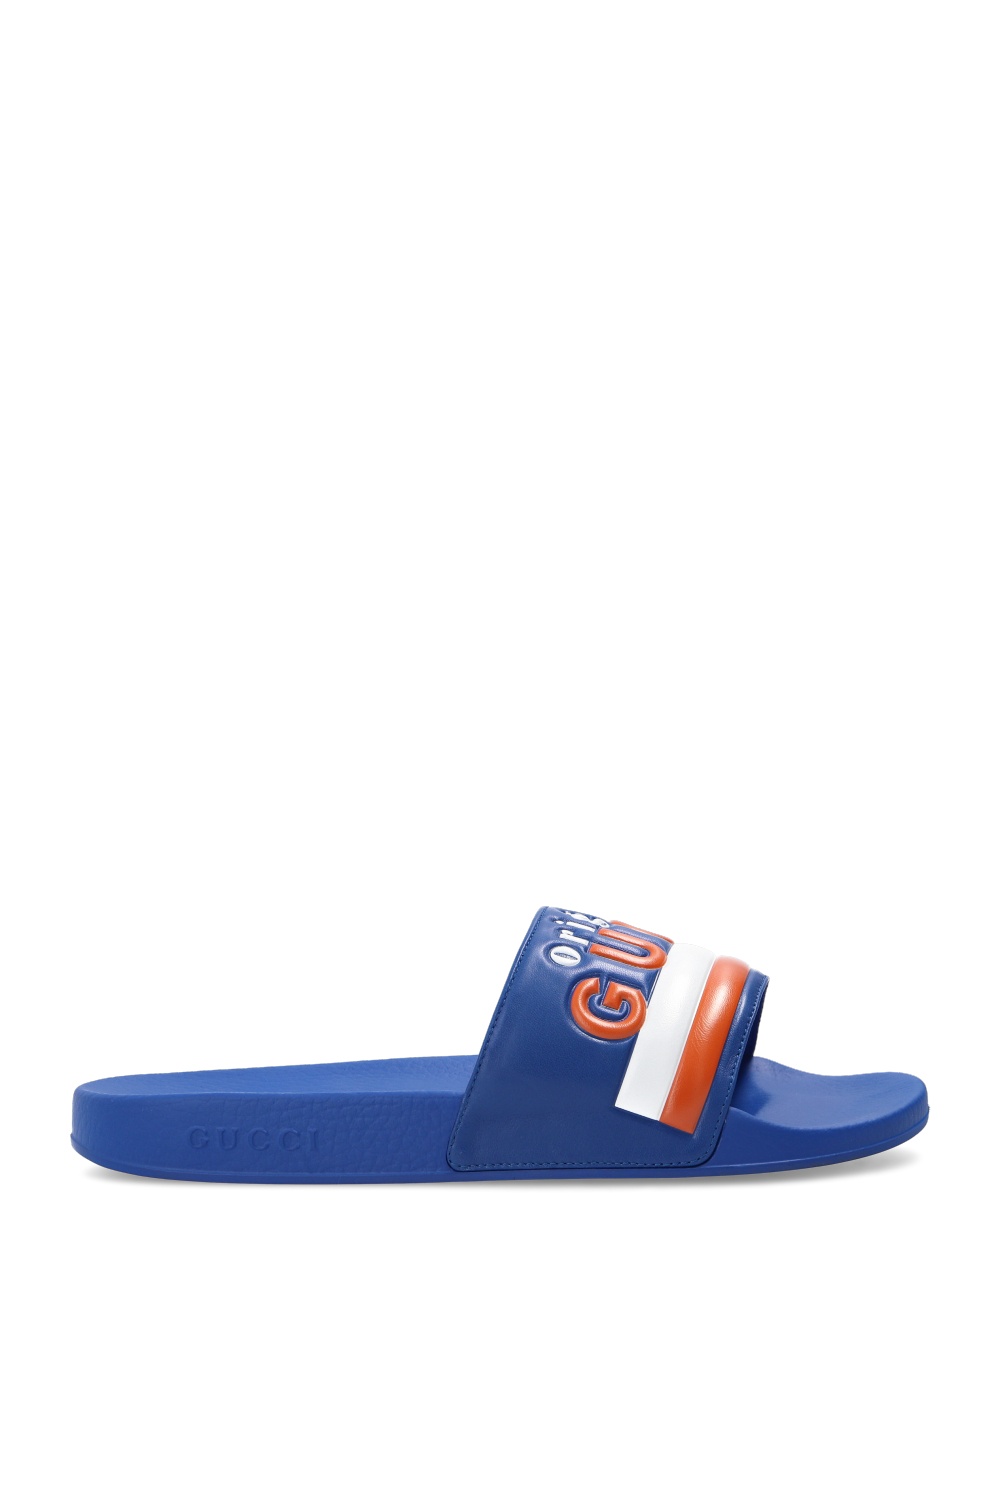 what stores sell gucci slides